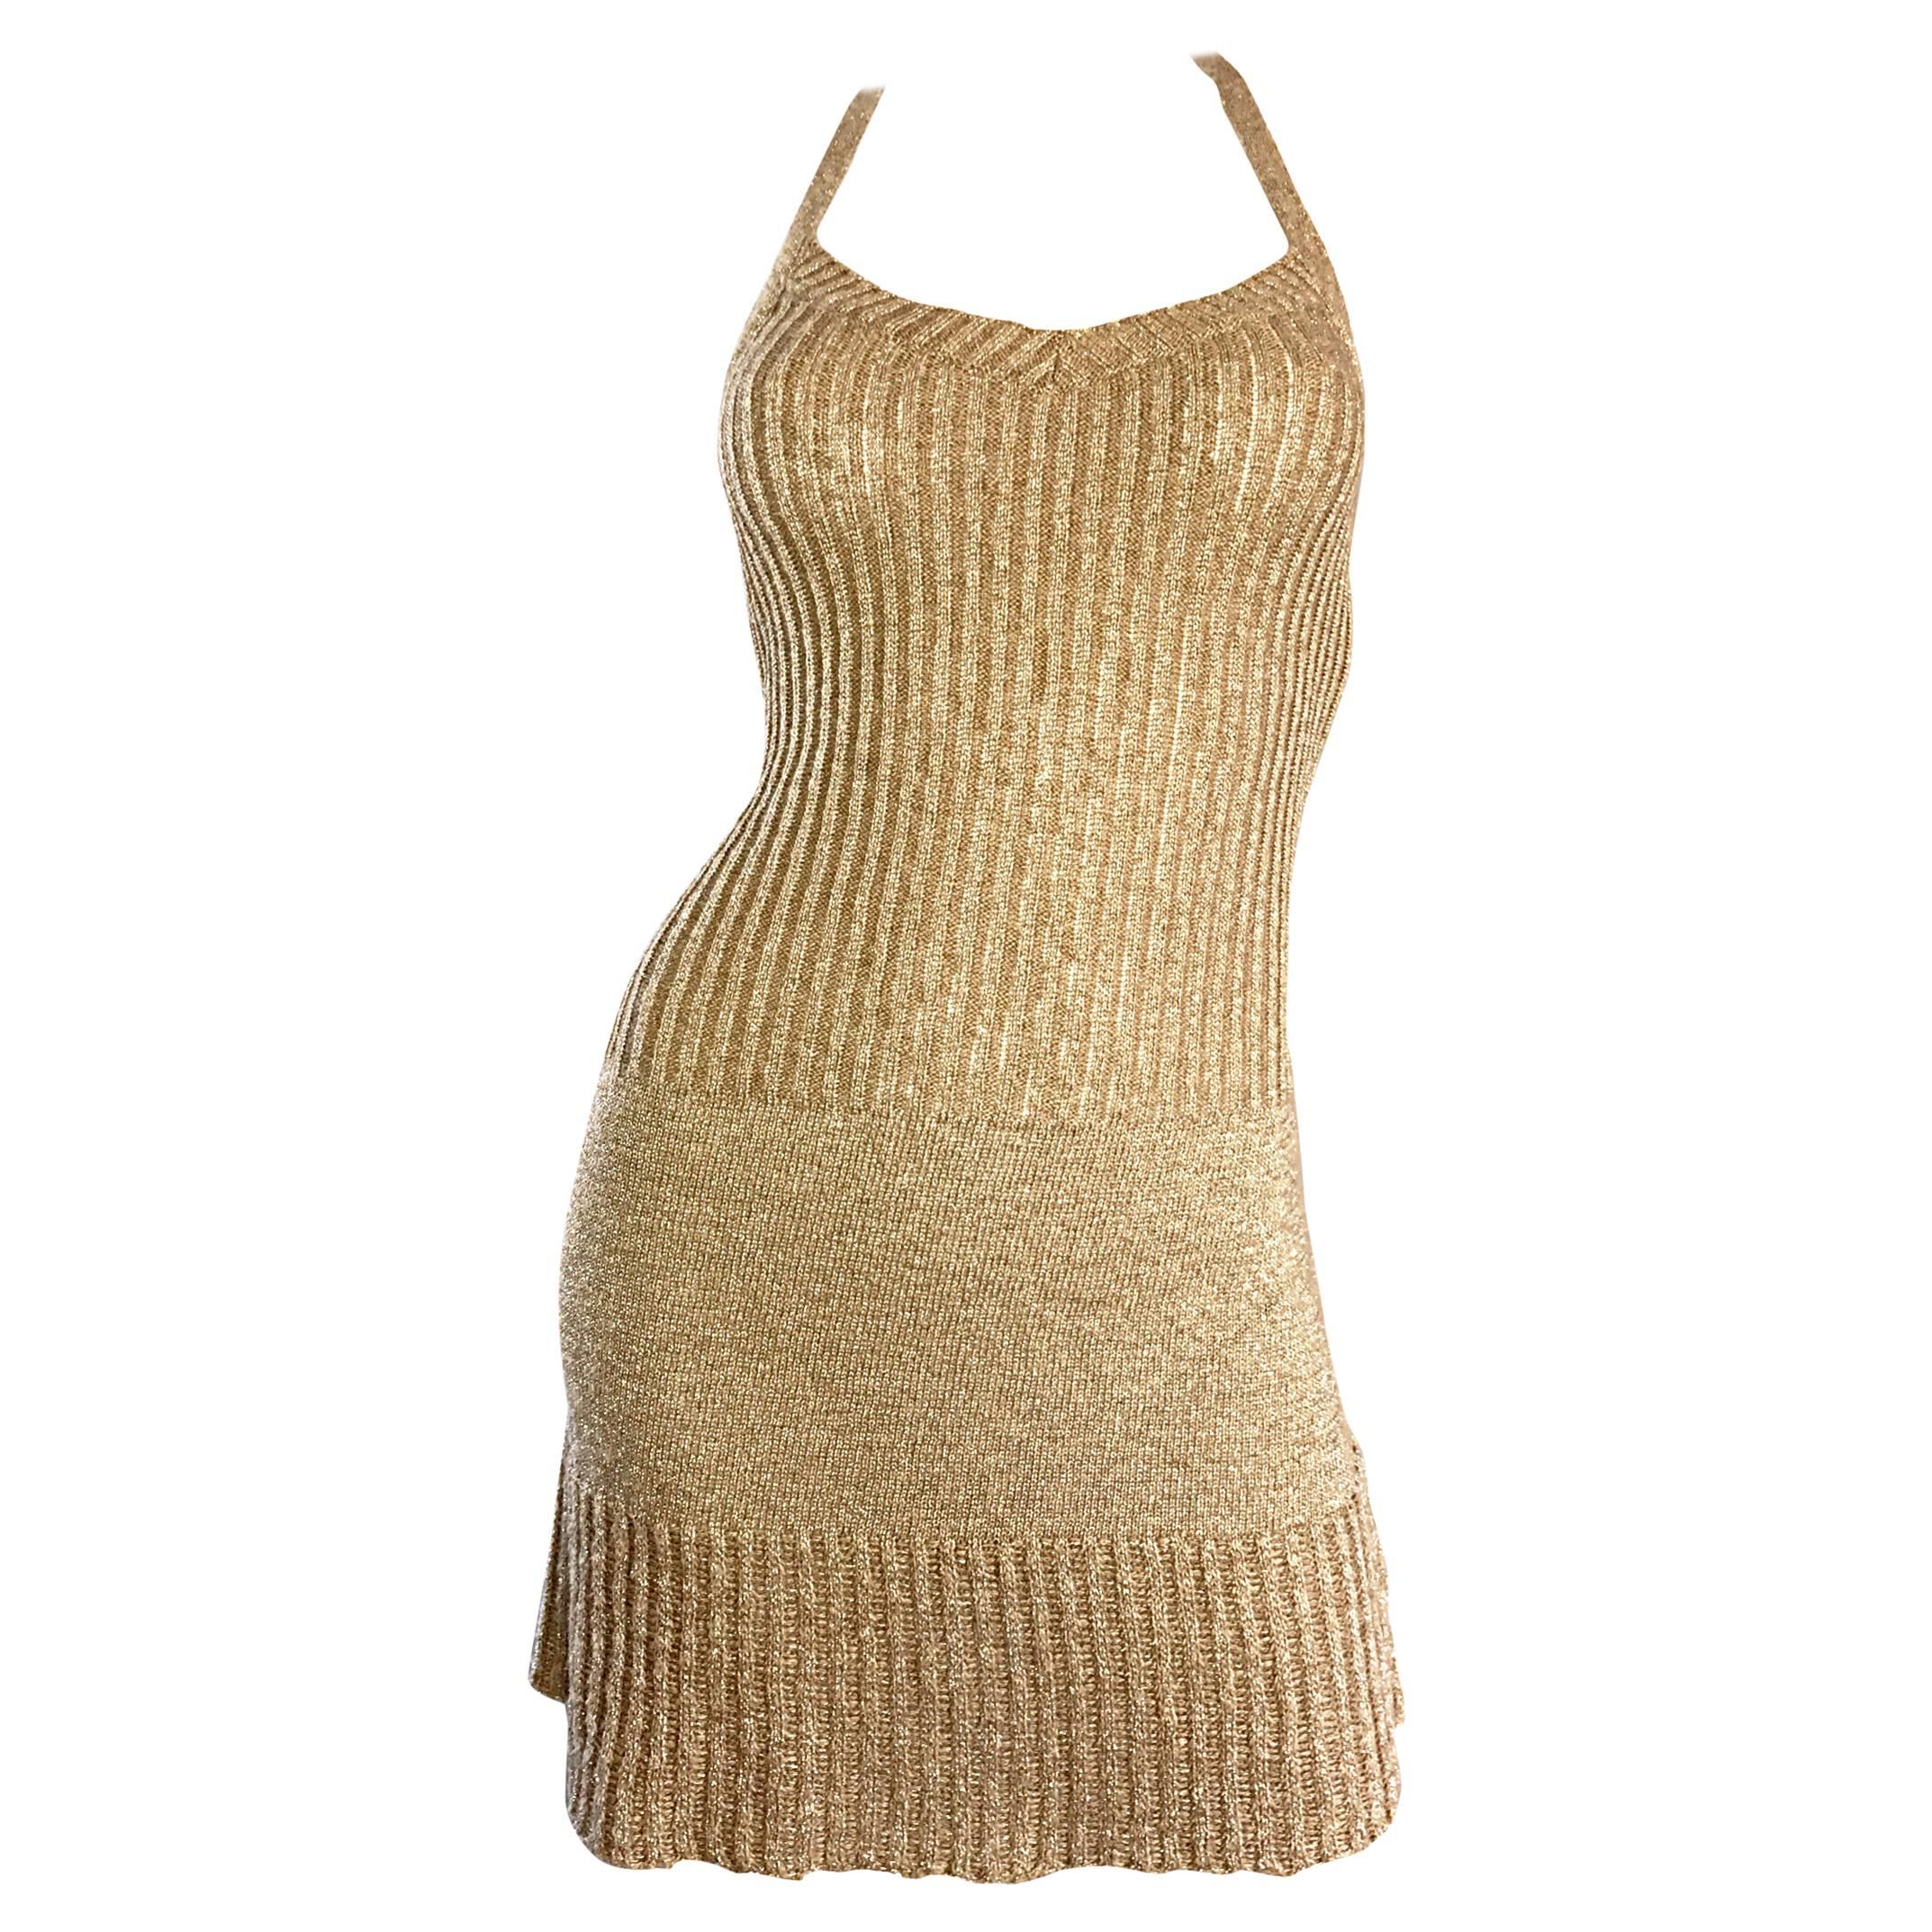 Vintage Moschino Cheap and Chic 1990s Gold Metallic Halter Neck Sweater Dress 